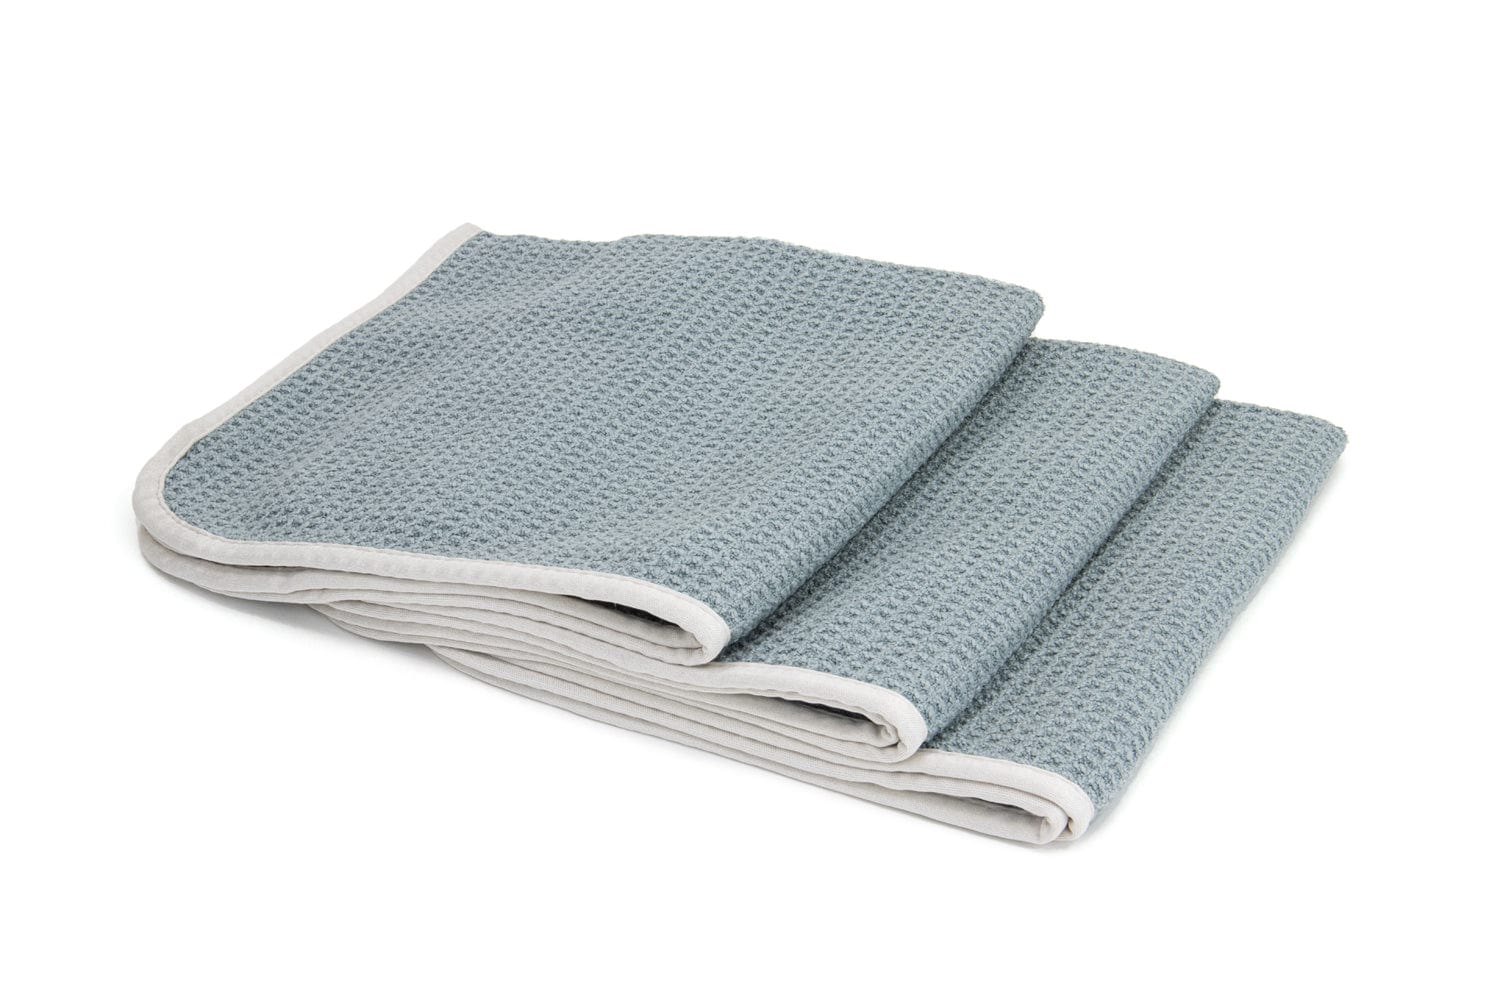 Waffle Weave Drying Towel: Absorbent, Designed For Drying Your Car